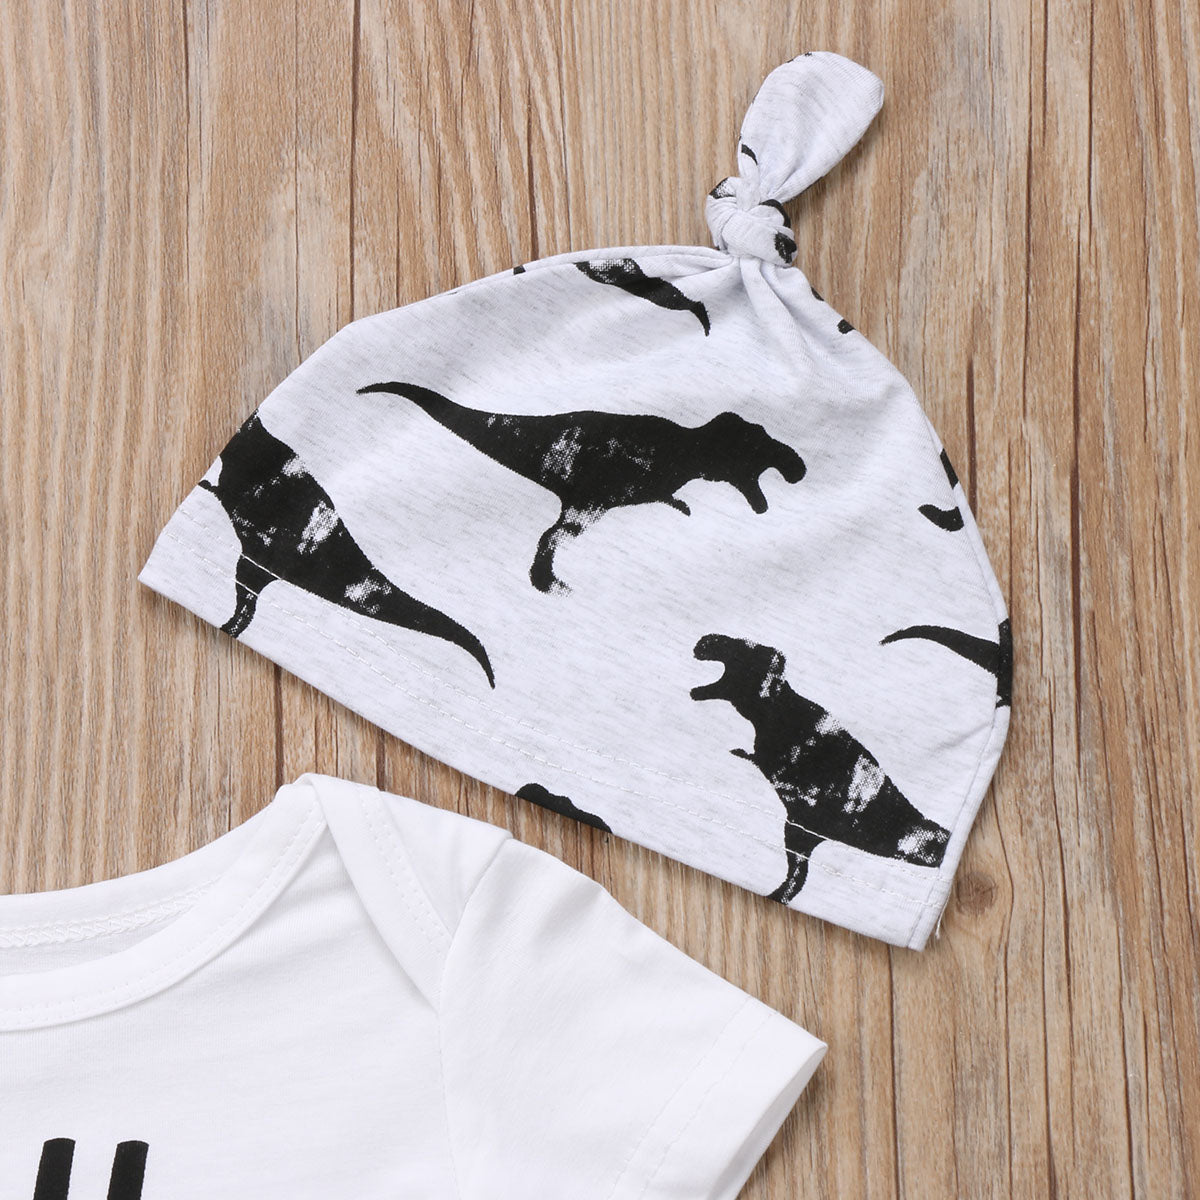 Fashion Letter Newborn Baby Kids Boys Girls Short Sleeve Clothes Dinosaur Romper Tops+Long Pants+Hat Outfit 0-24M - ebowsos